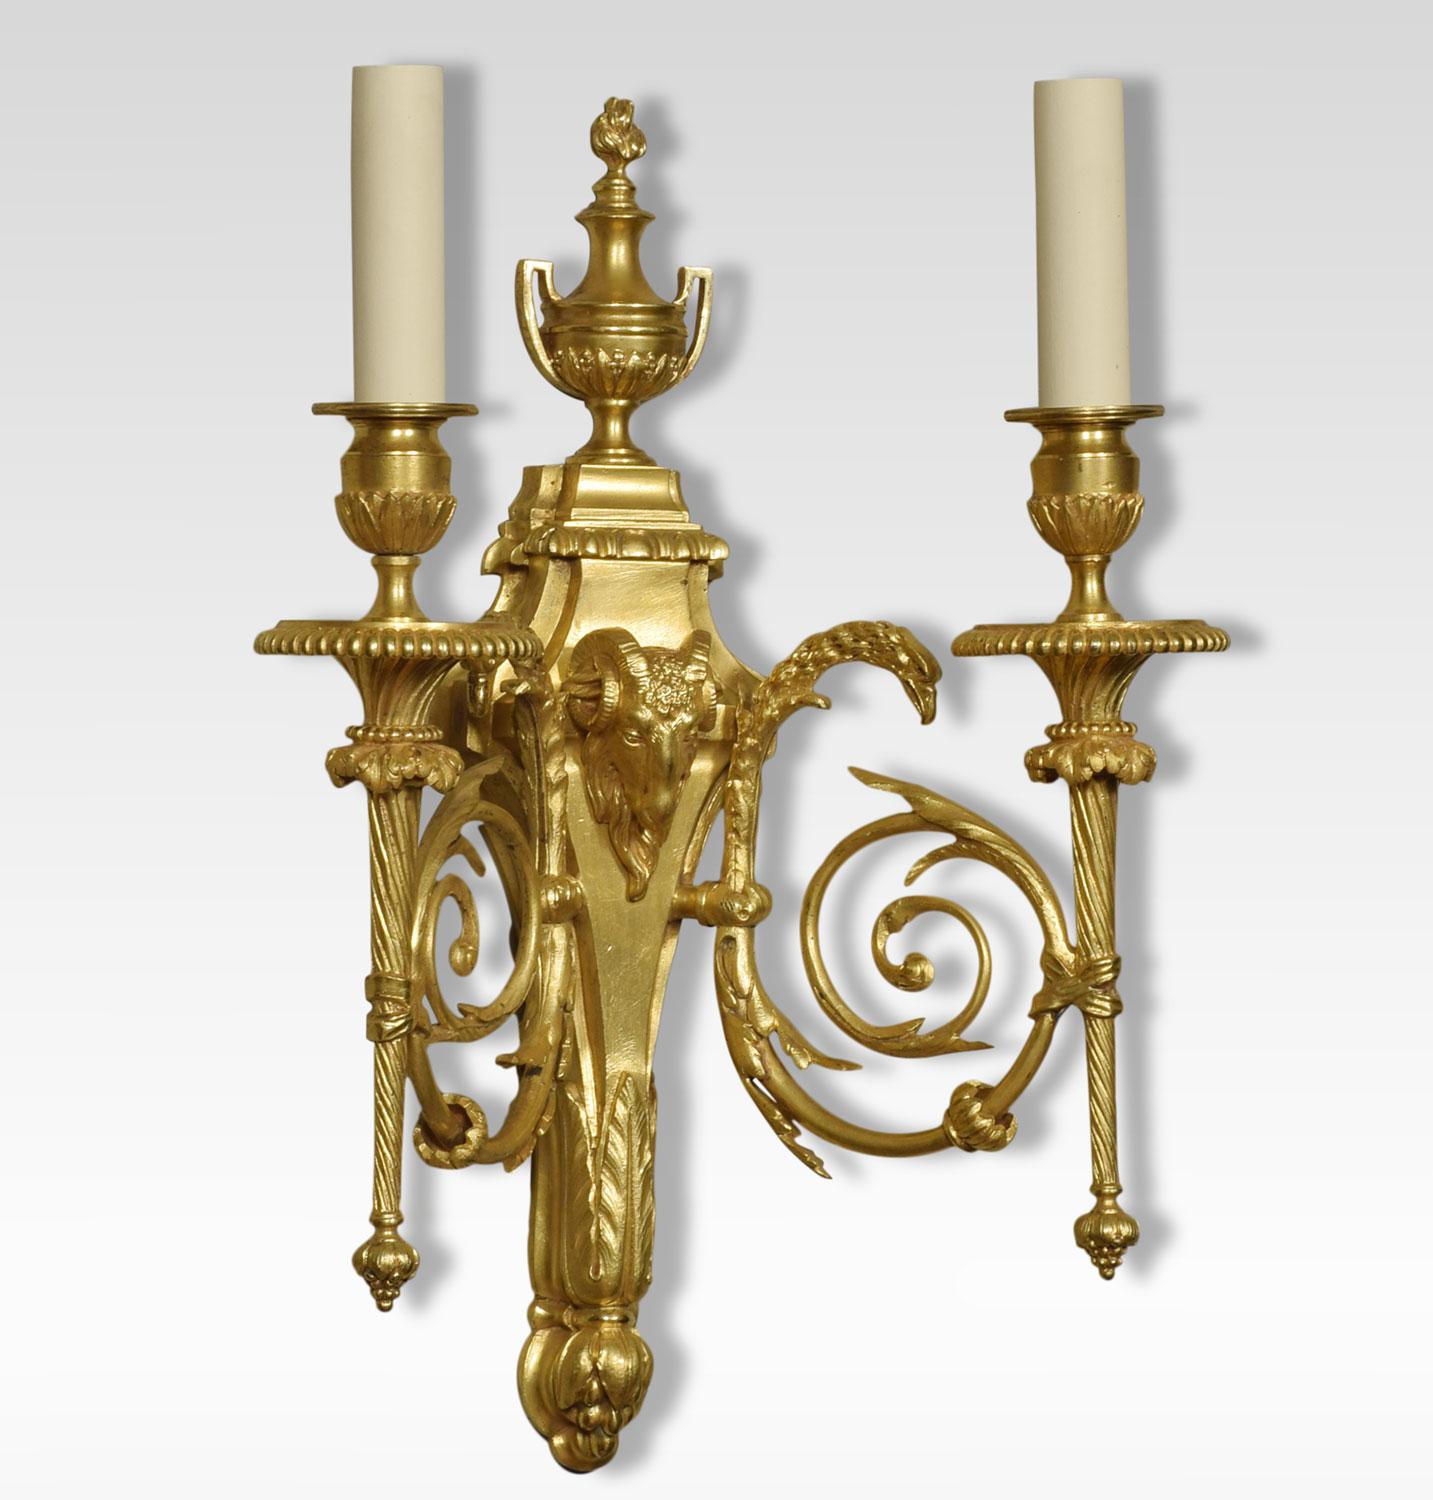 A pair of gilded bronze twin branch wall lights, the leaf scrolling arms with eagle-headed capitals having circular drip pans and acanthus sconces. Issuing from tapering backplate, with pierced finial above rams headed centre. The wall lights have